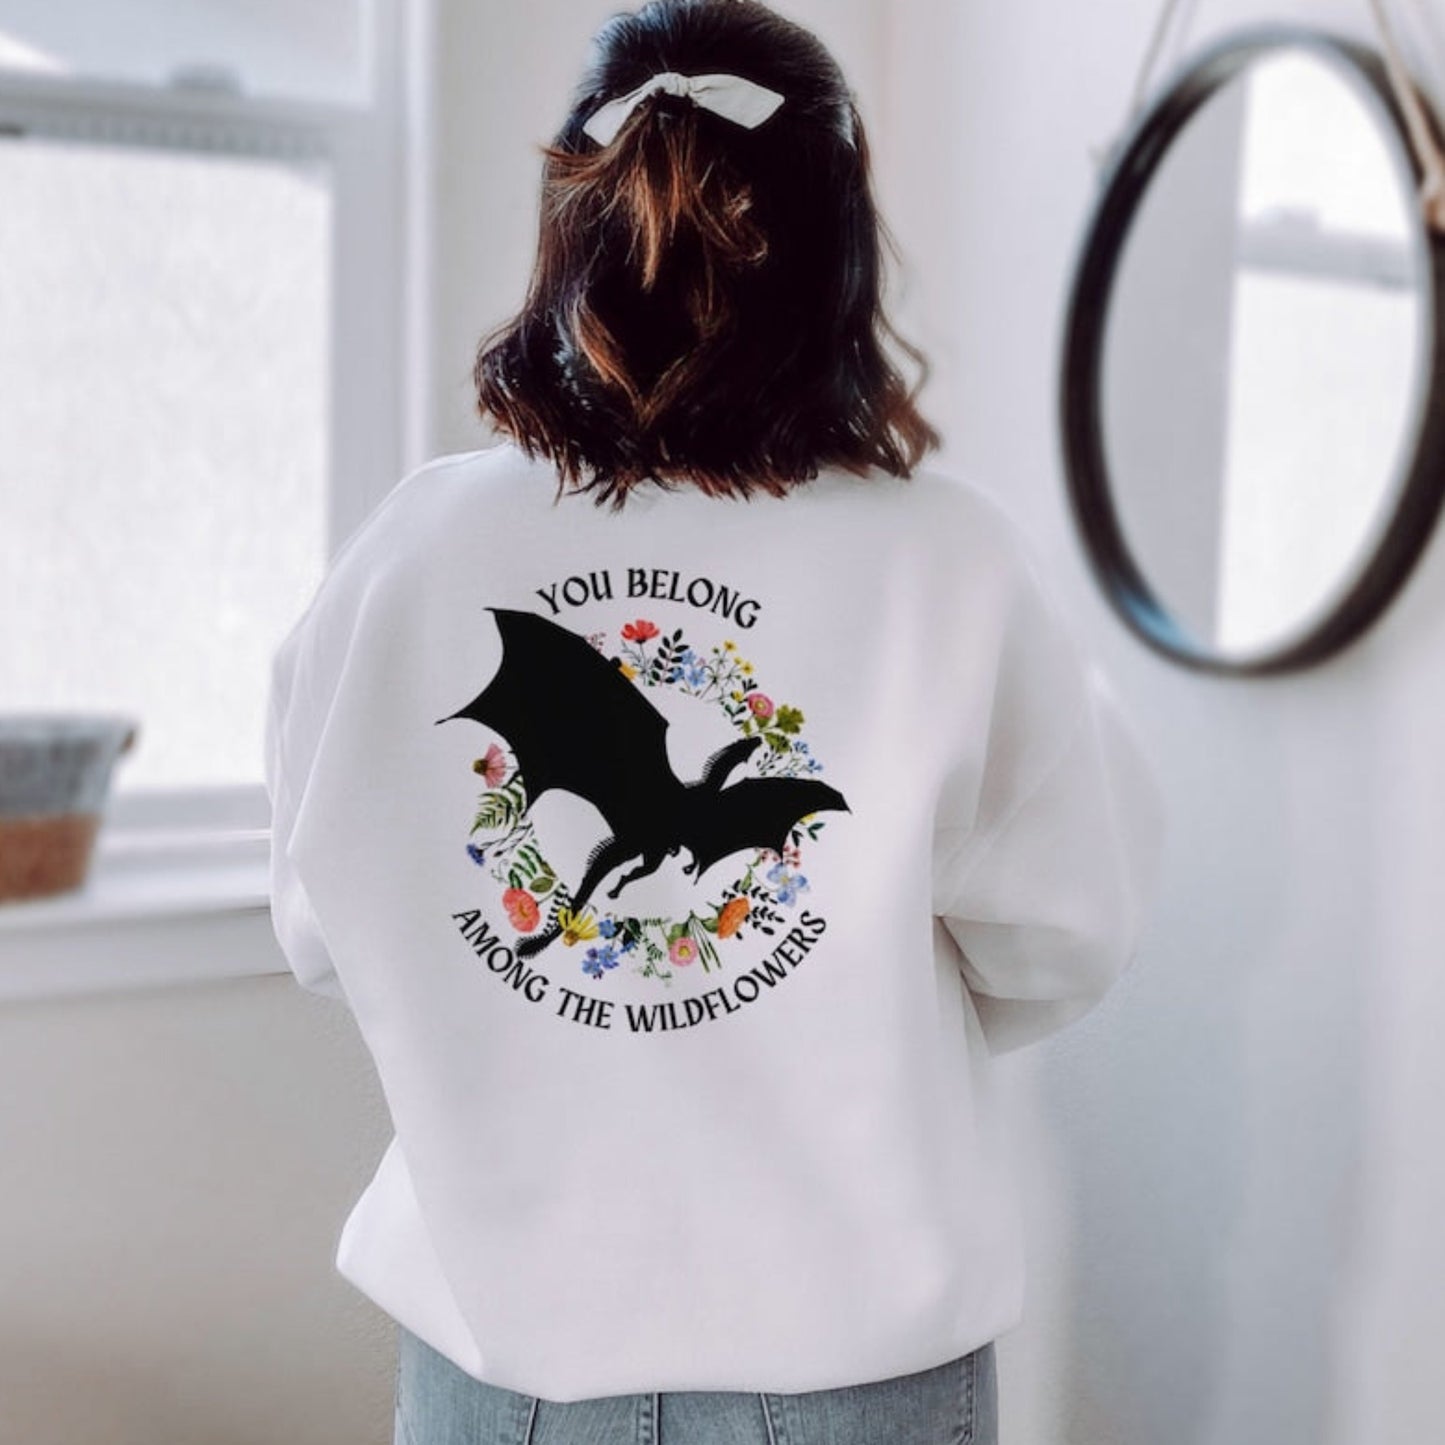 Throne of glass abraxos sweatshirt - officially licensed by Sarah J Maas